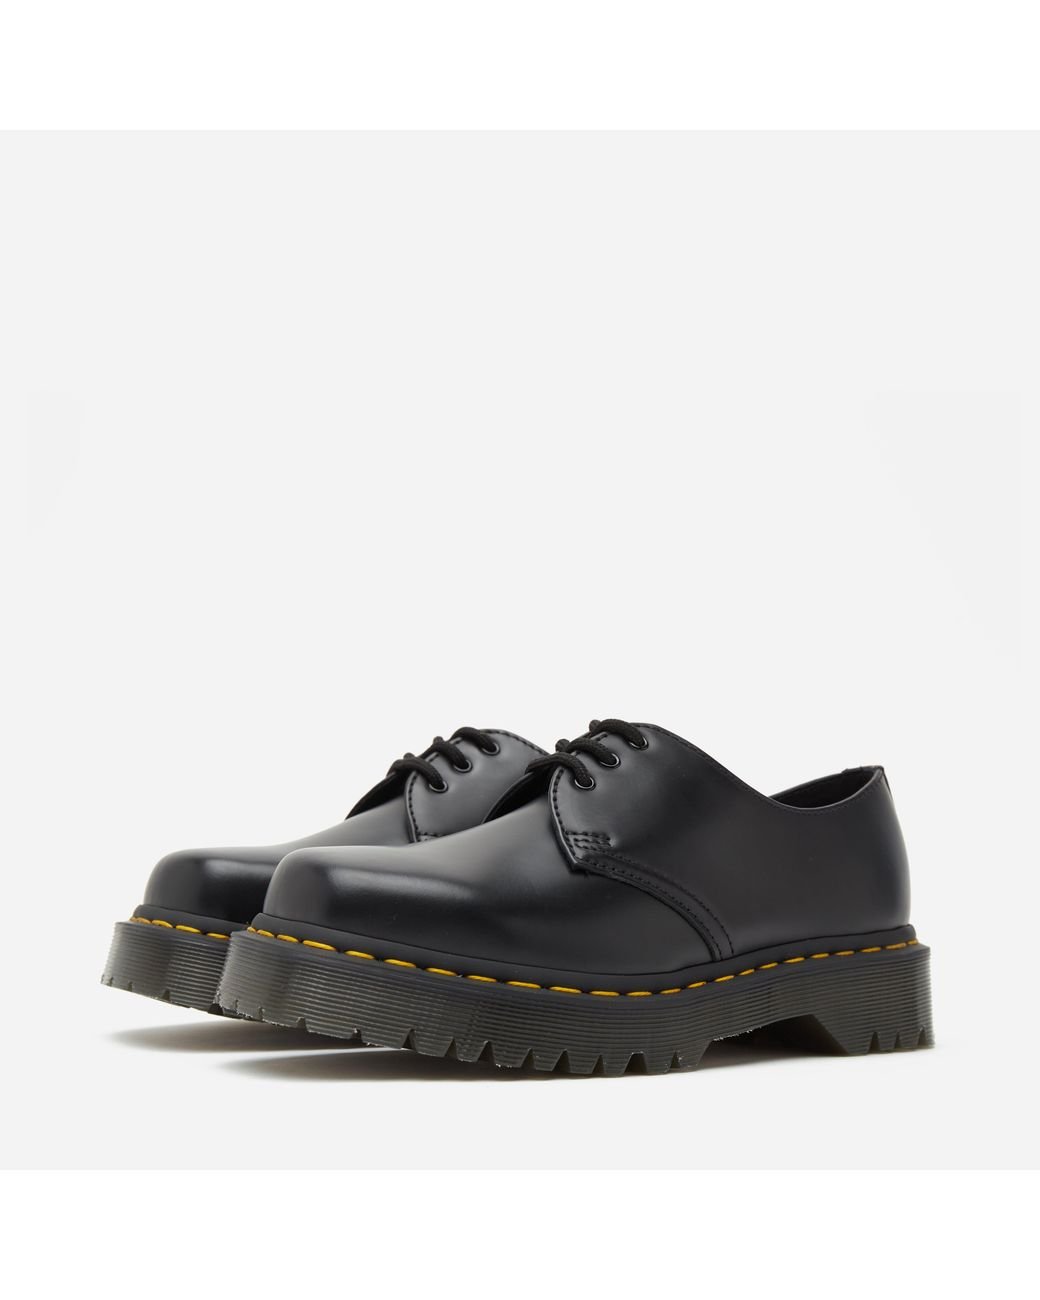 Dr. Martens 1461 Bex Squared Toe Oxford Shoe in Black | Lyst